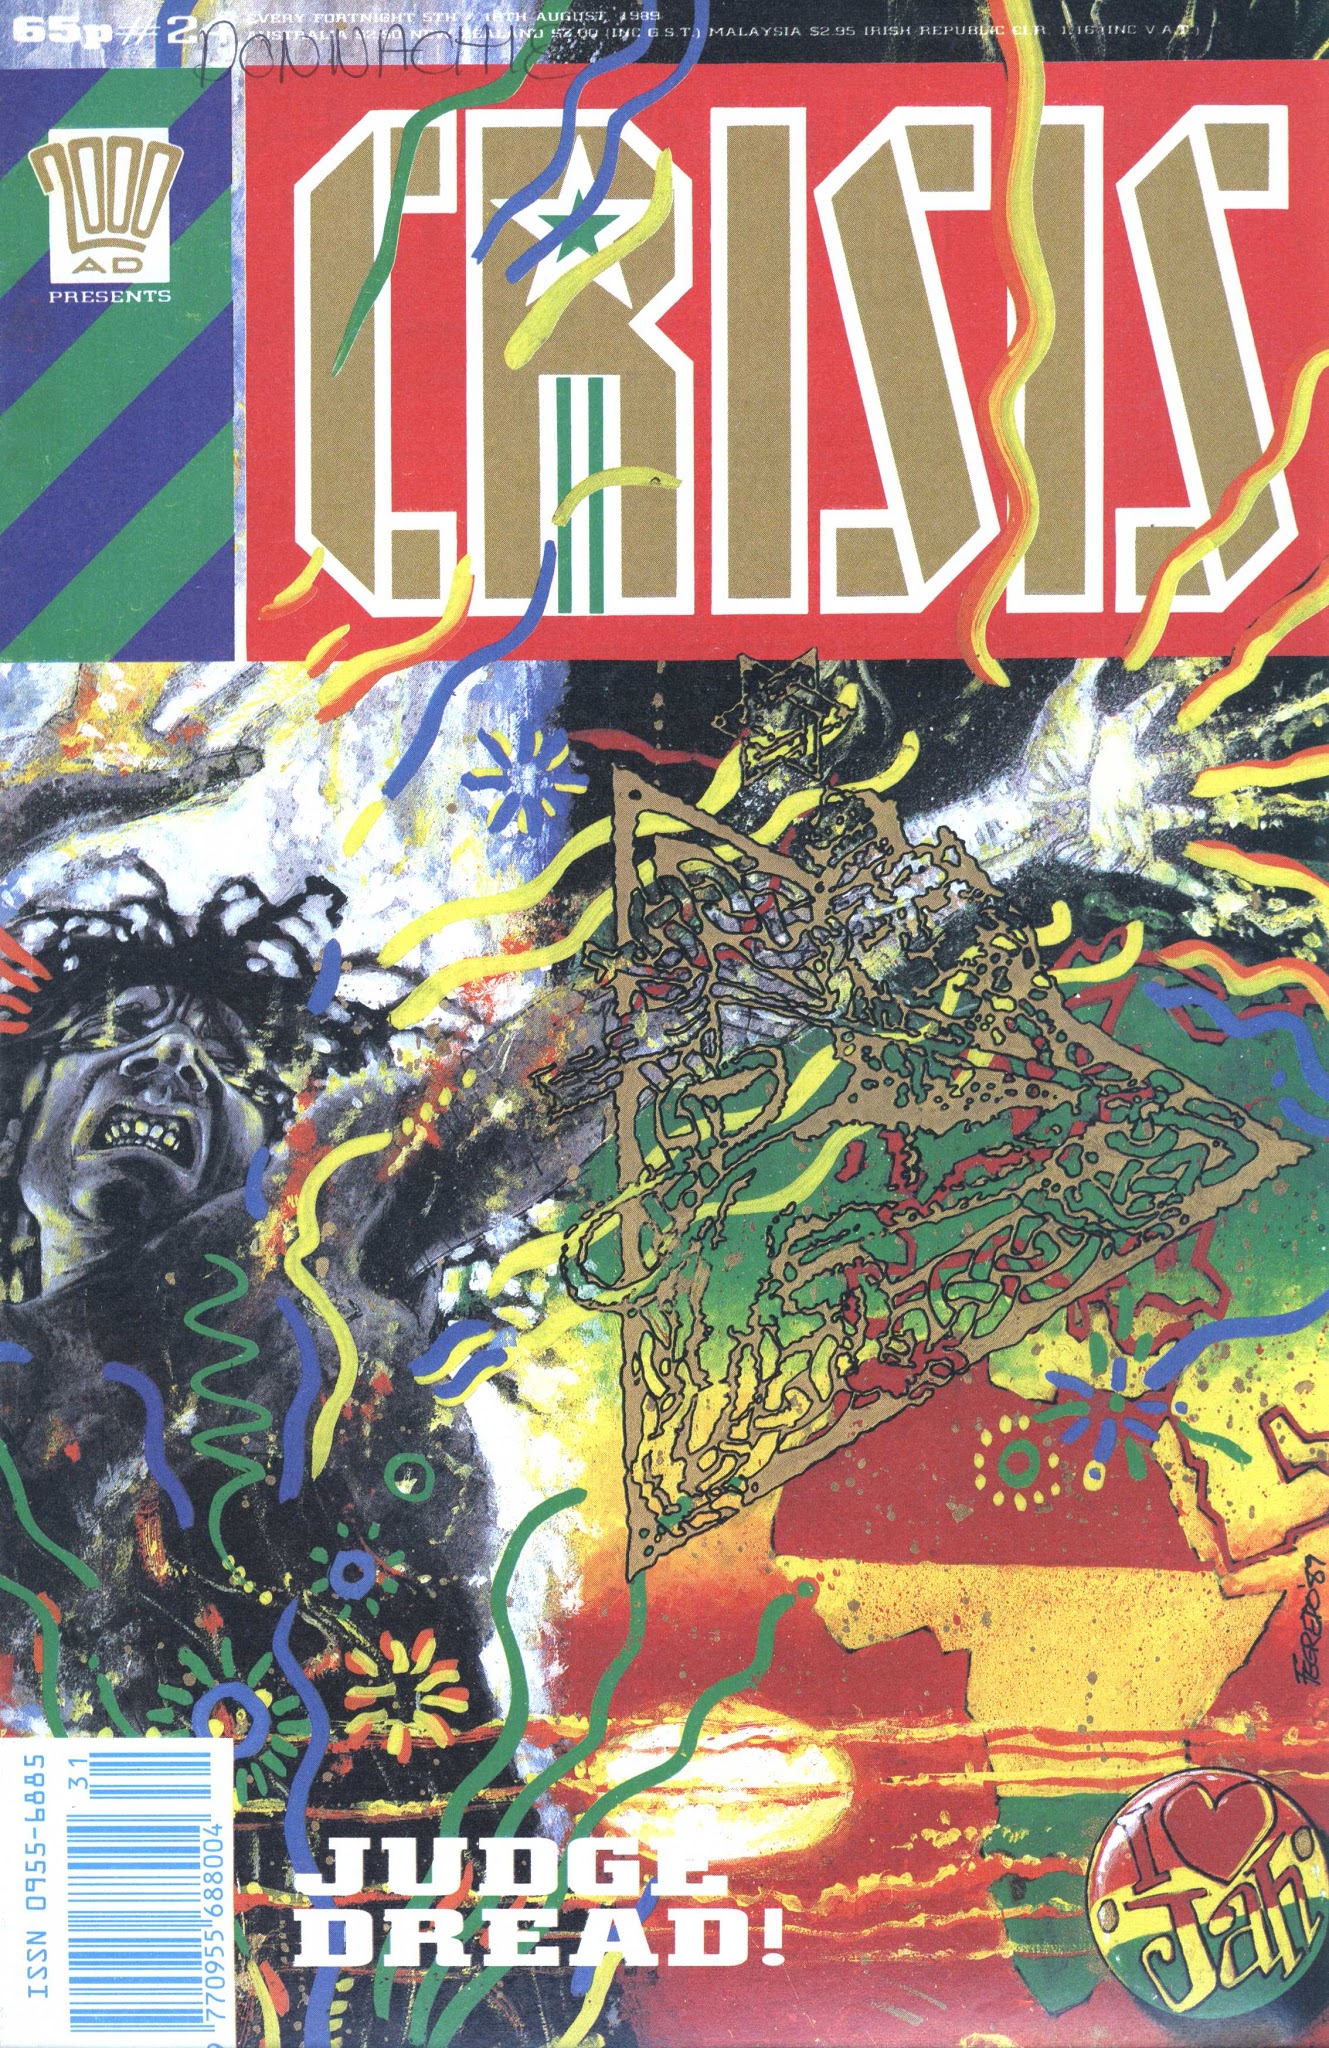 Read online Crisis comic -  Issue #24 - 1